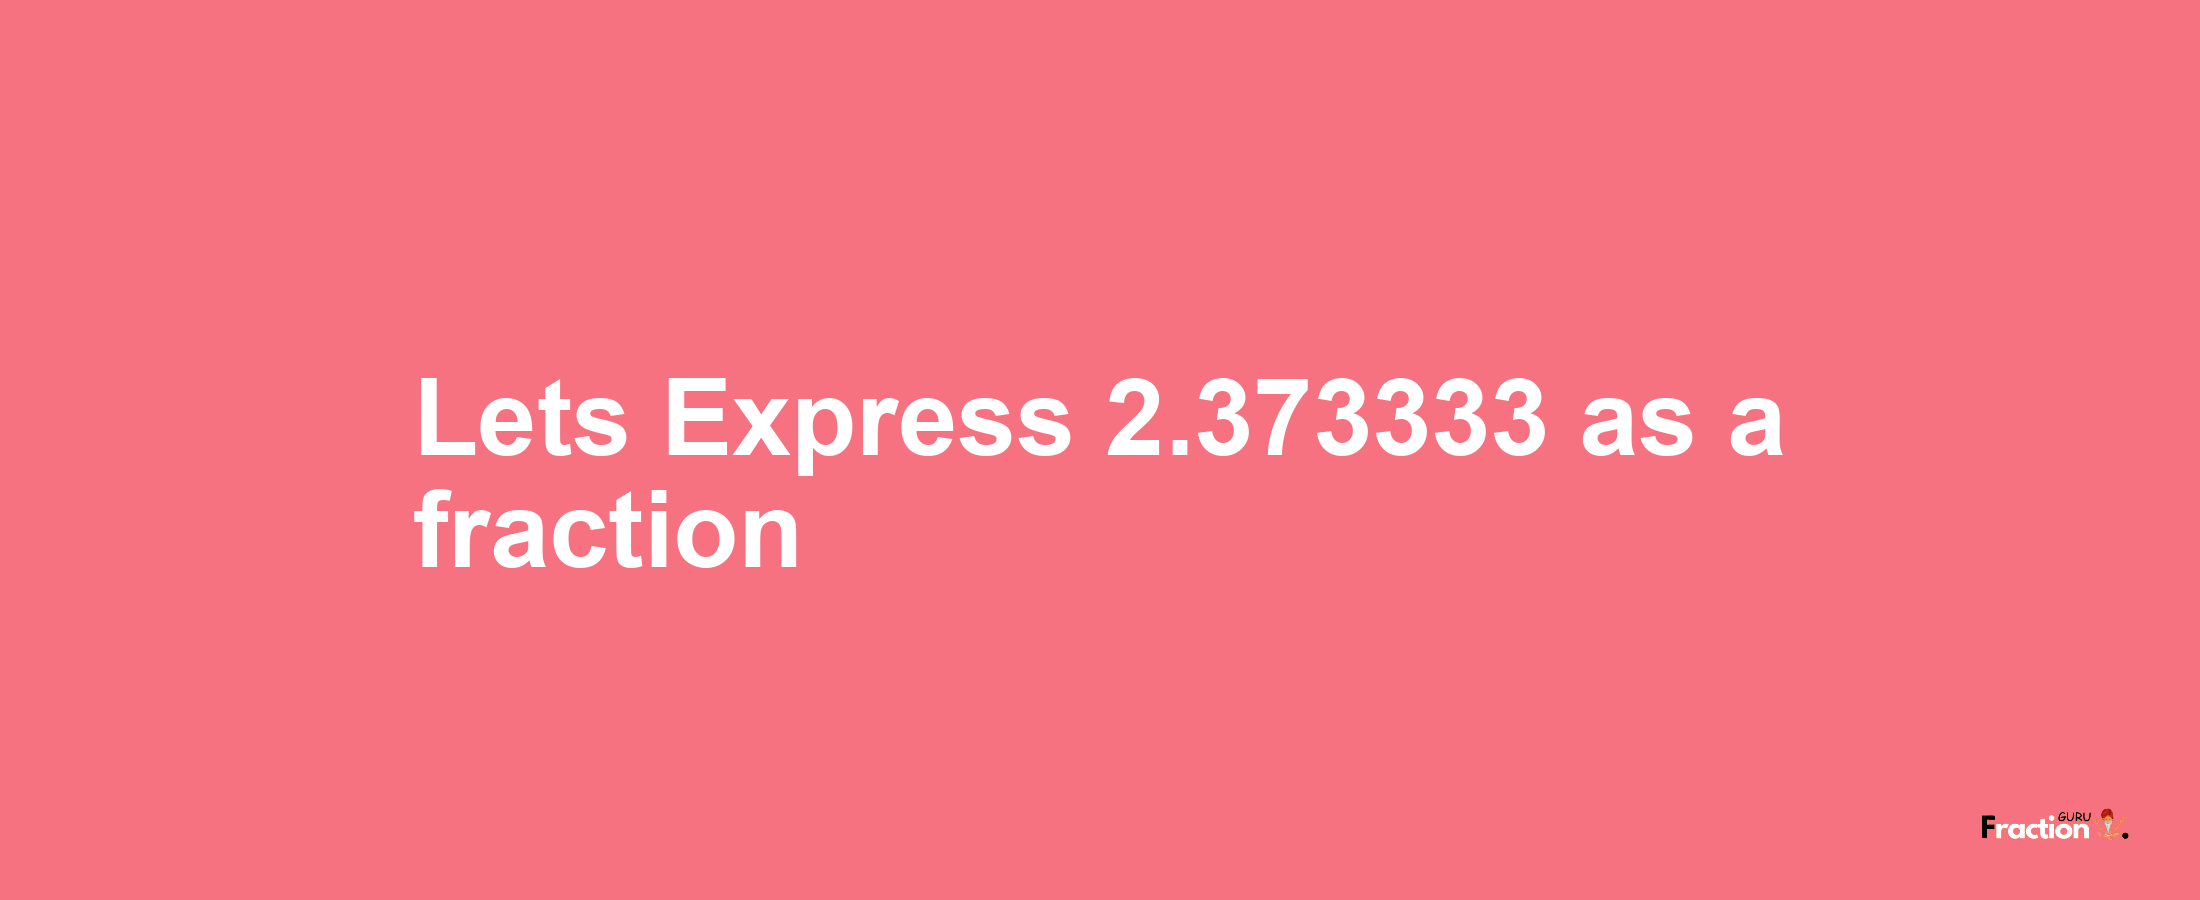 Lets Express 2.373333 as afraction